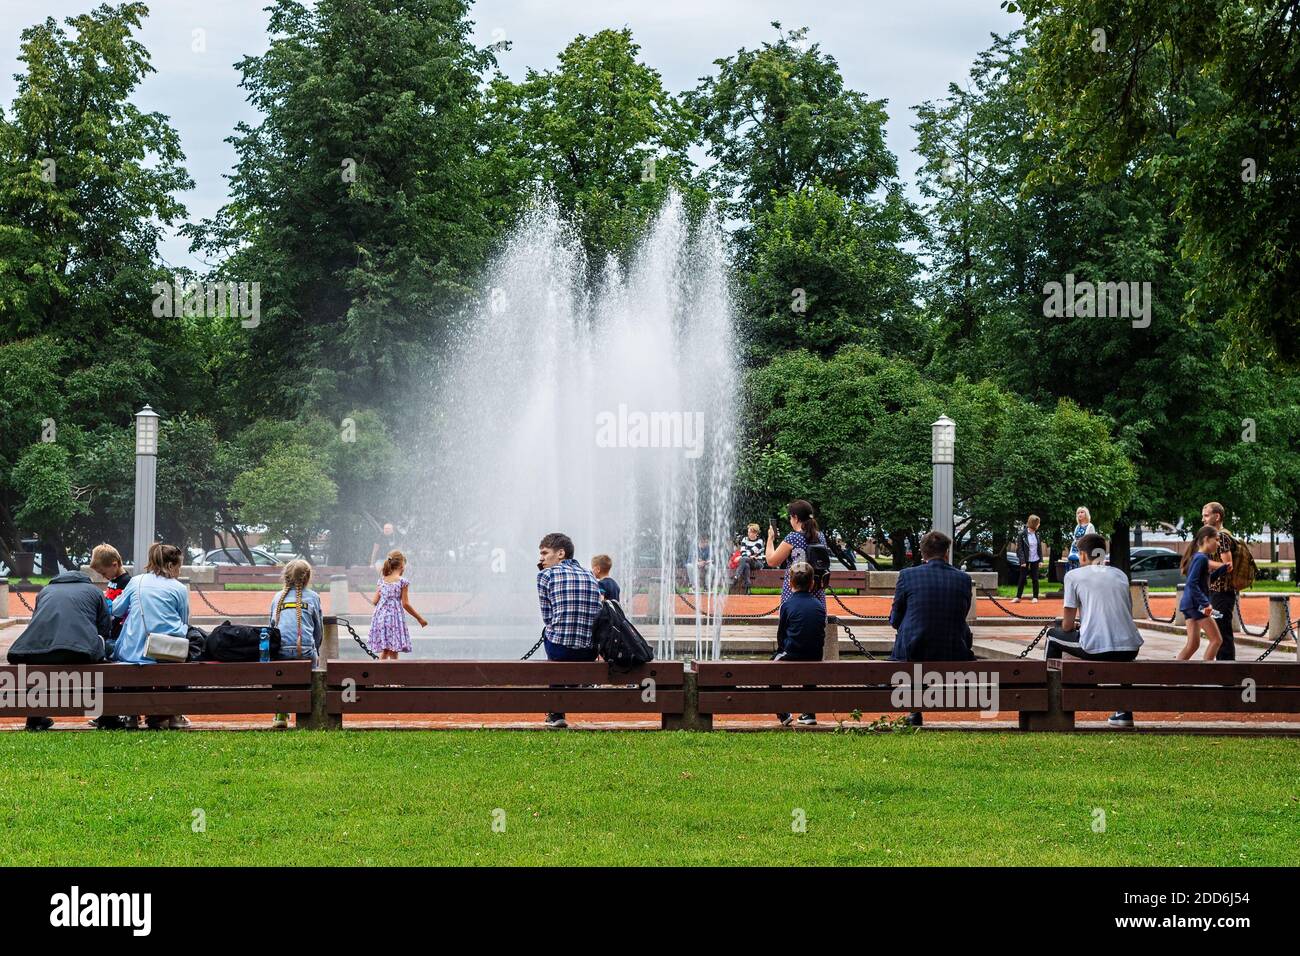 Saint Petersburg, Russia, August 3: Tourists and townspeople rest near the fountain in the city square on a warm summer day in St. Petersburg, August Stock Photo